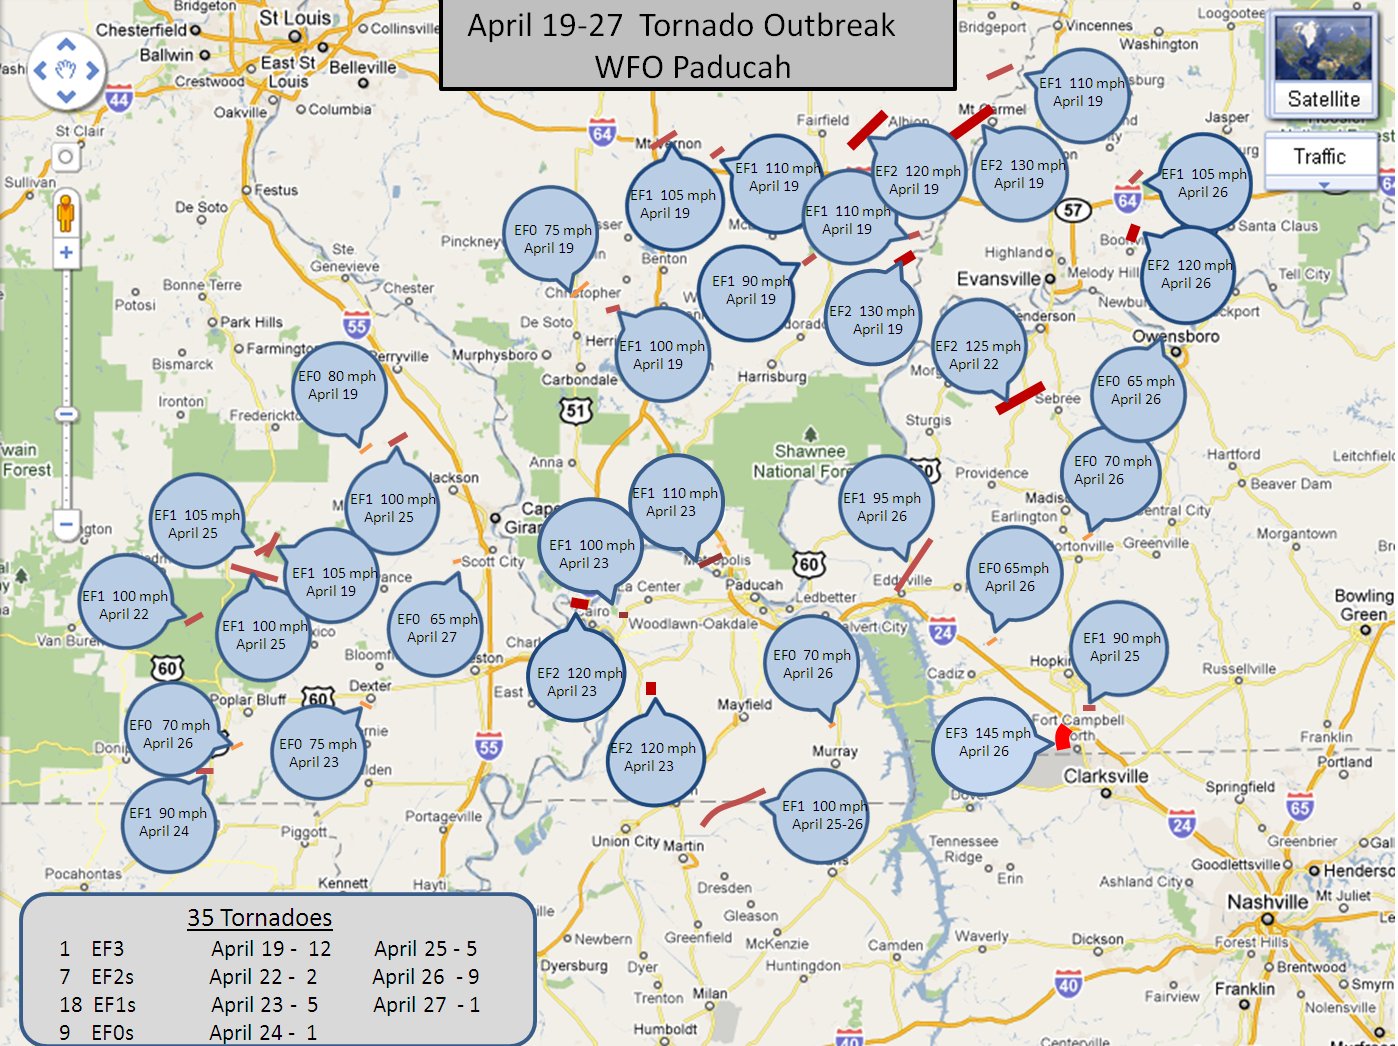 Tornado path map for the period April 19-27